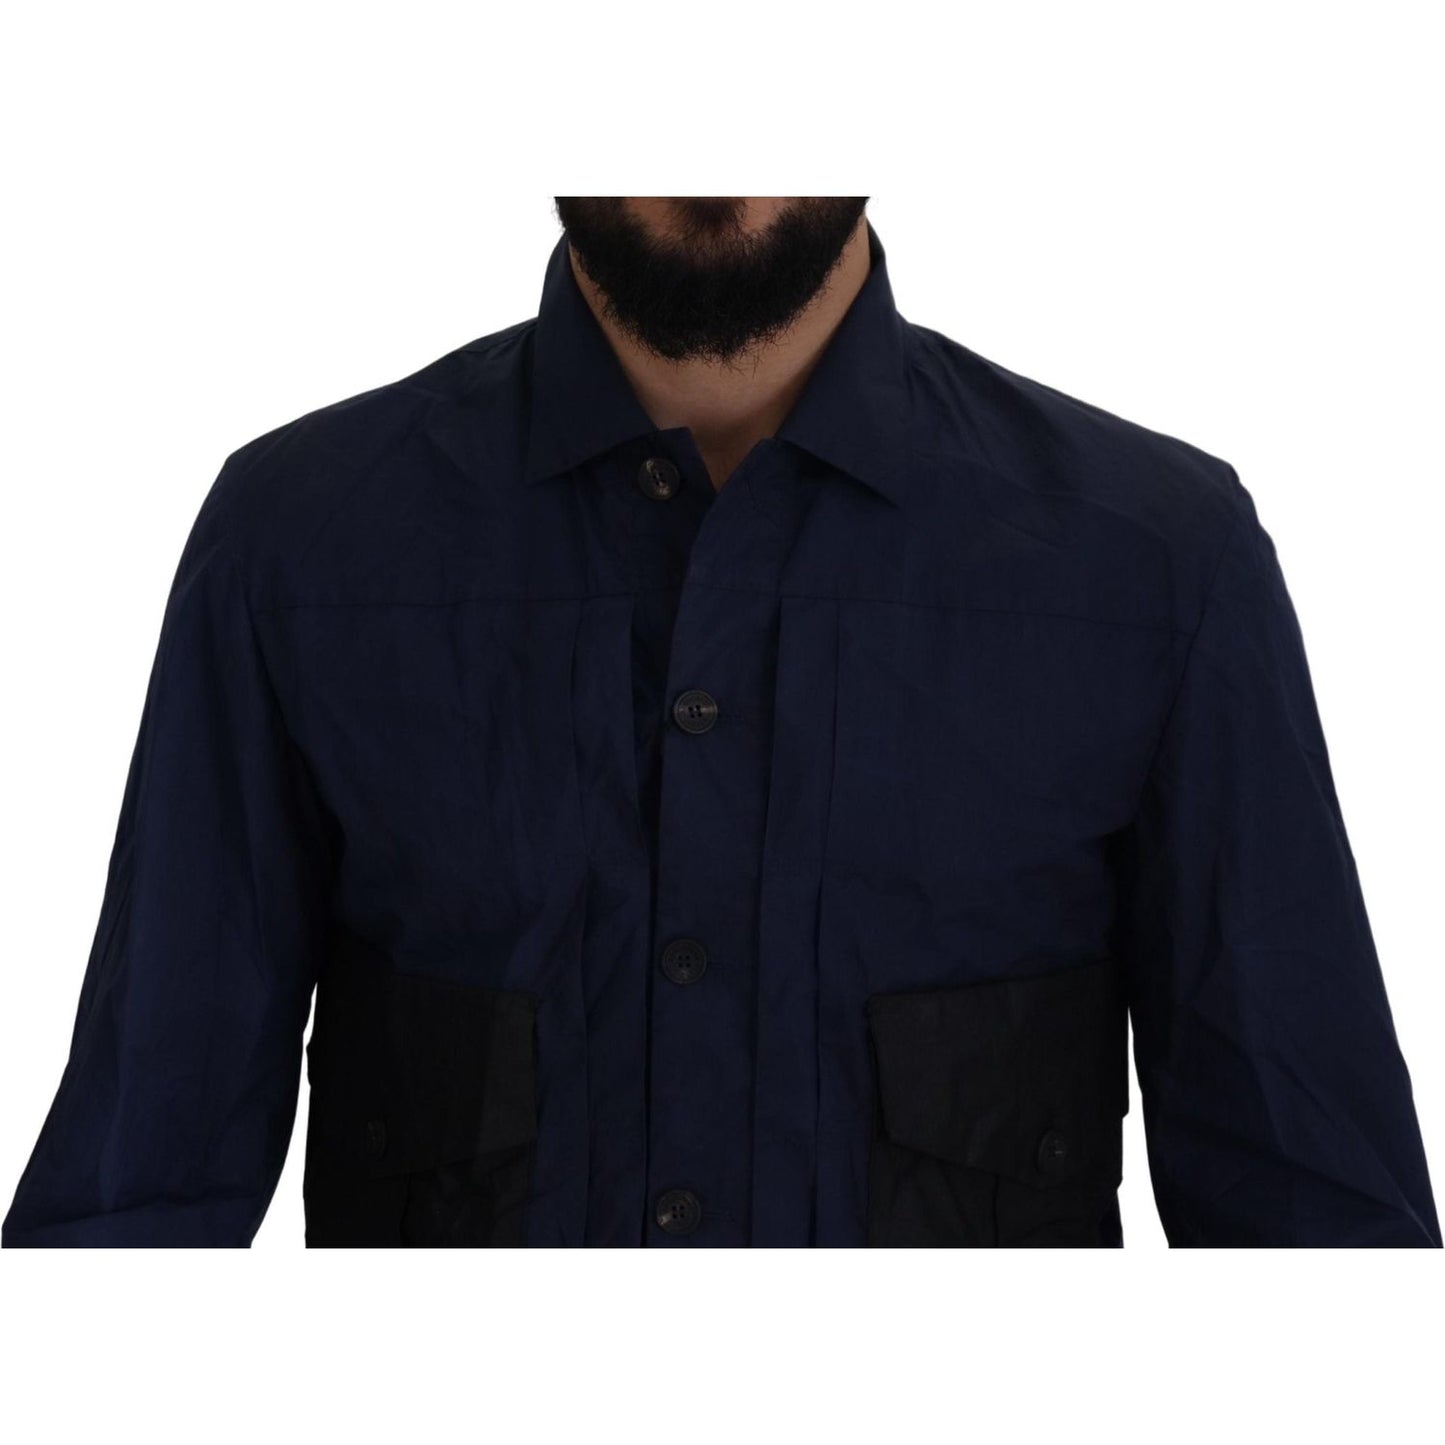 Dsquared² Svelte Dark Blue Cotton Shirt dark-blue-cotton-collared-long-sleeves-casual-shirt IMG_7208-scaled-8759a4ce-24d.jpg